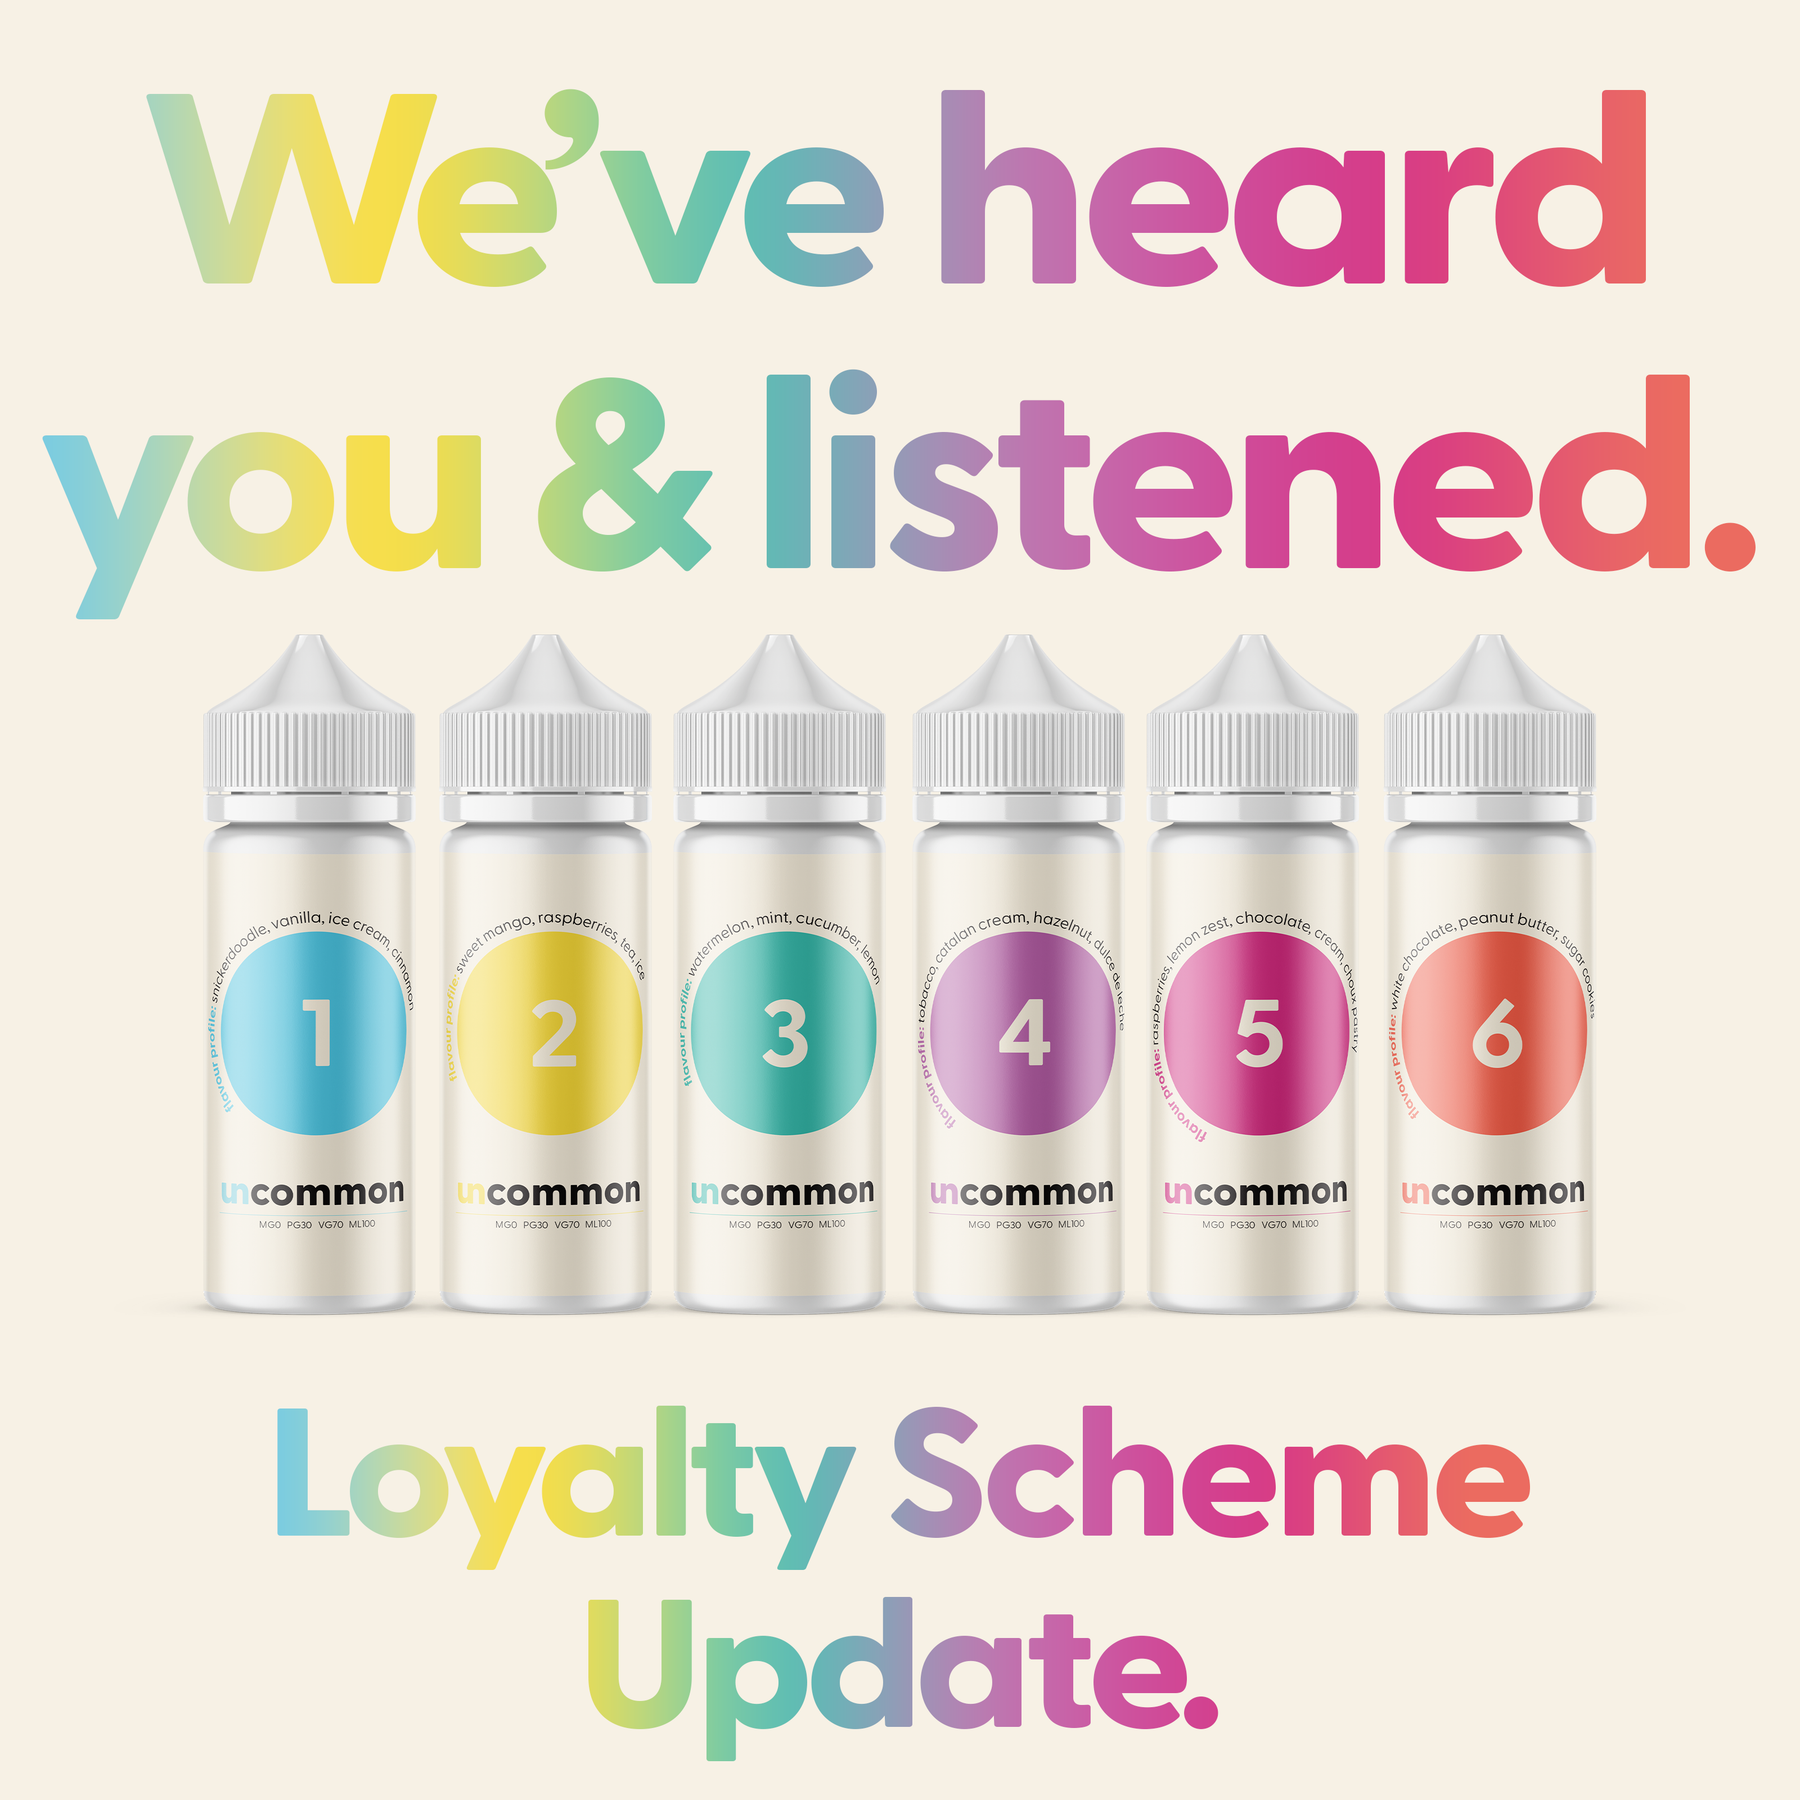 We've heard you, and listened | Loyalty Scheme Update.